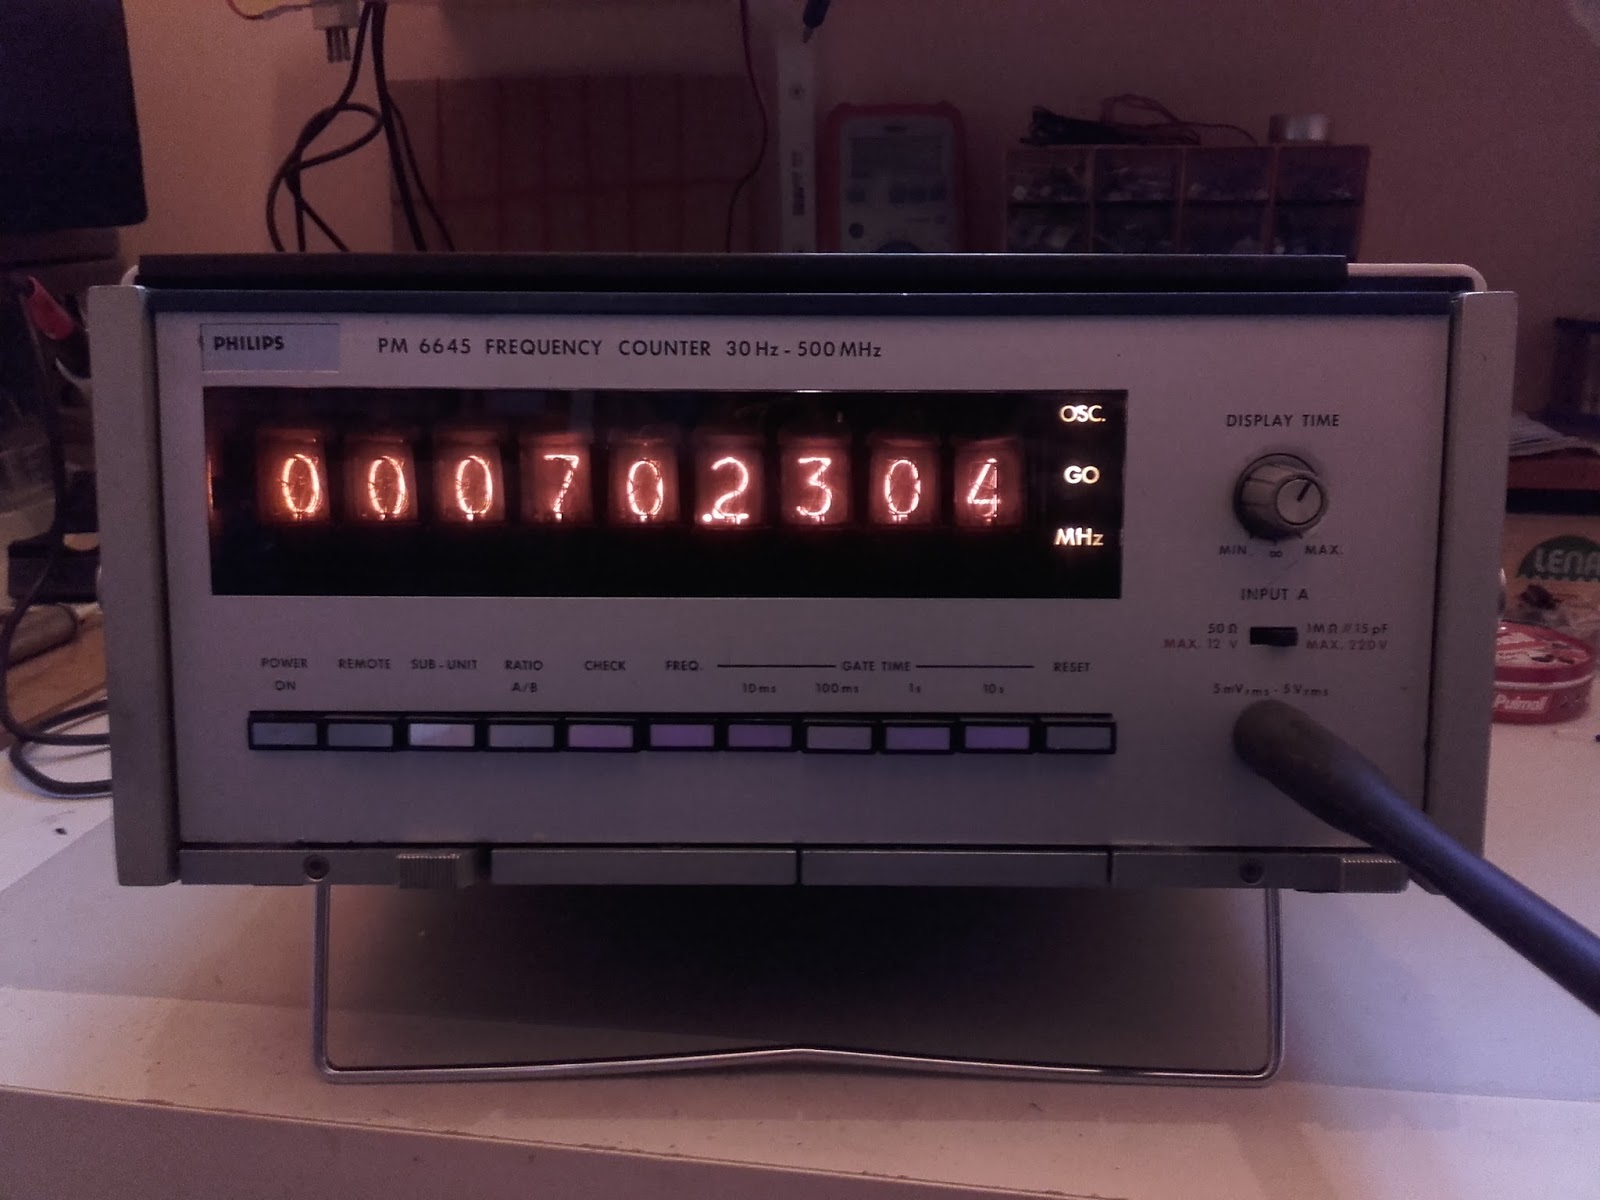 IK1ZYW Labs: New toy: 500 MHz Philips frequency counter